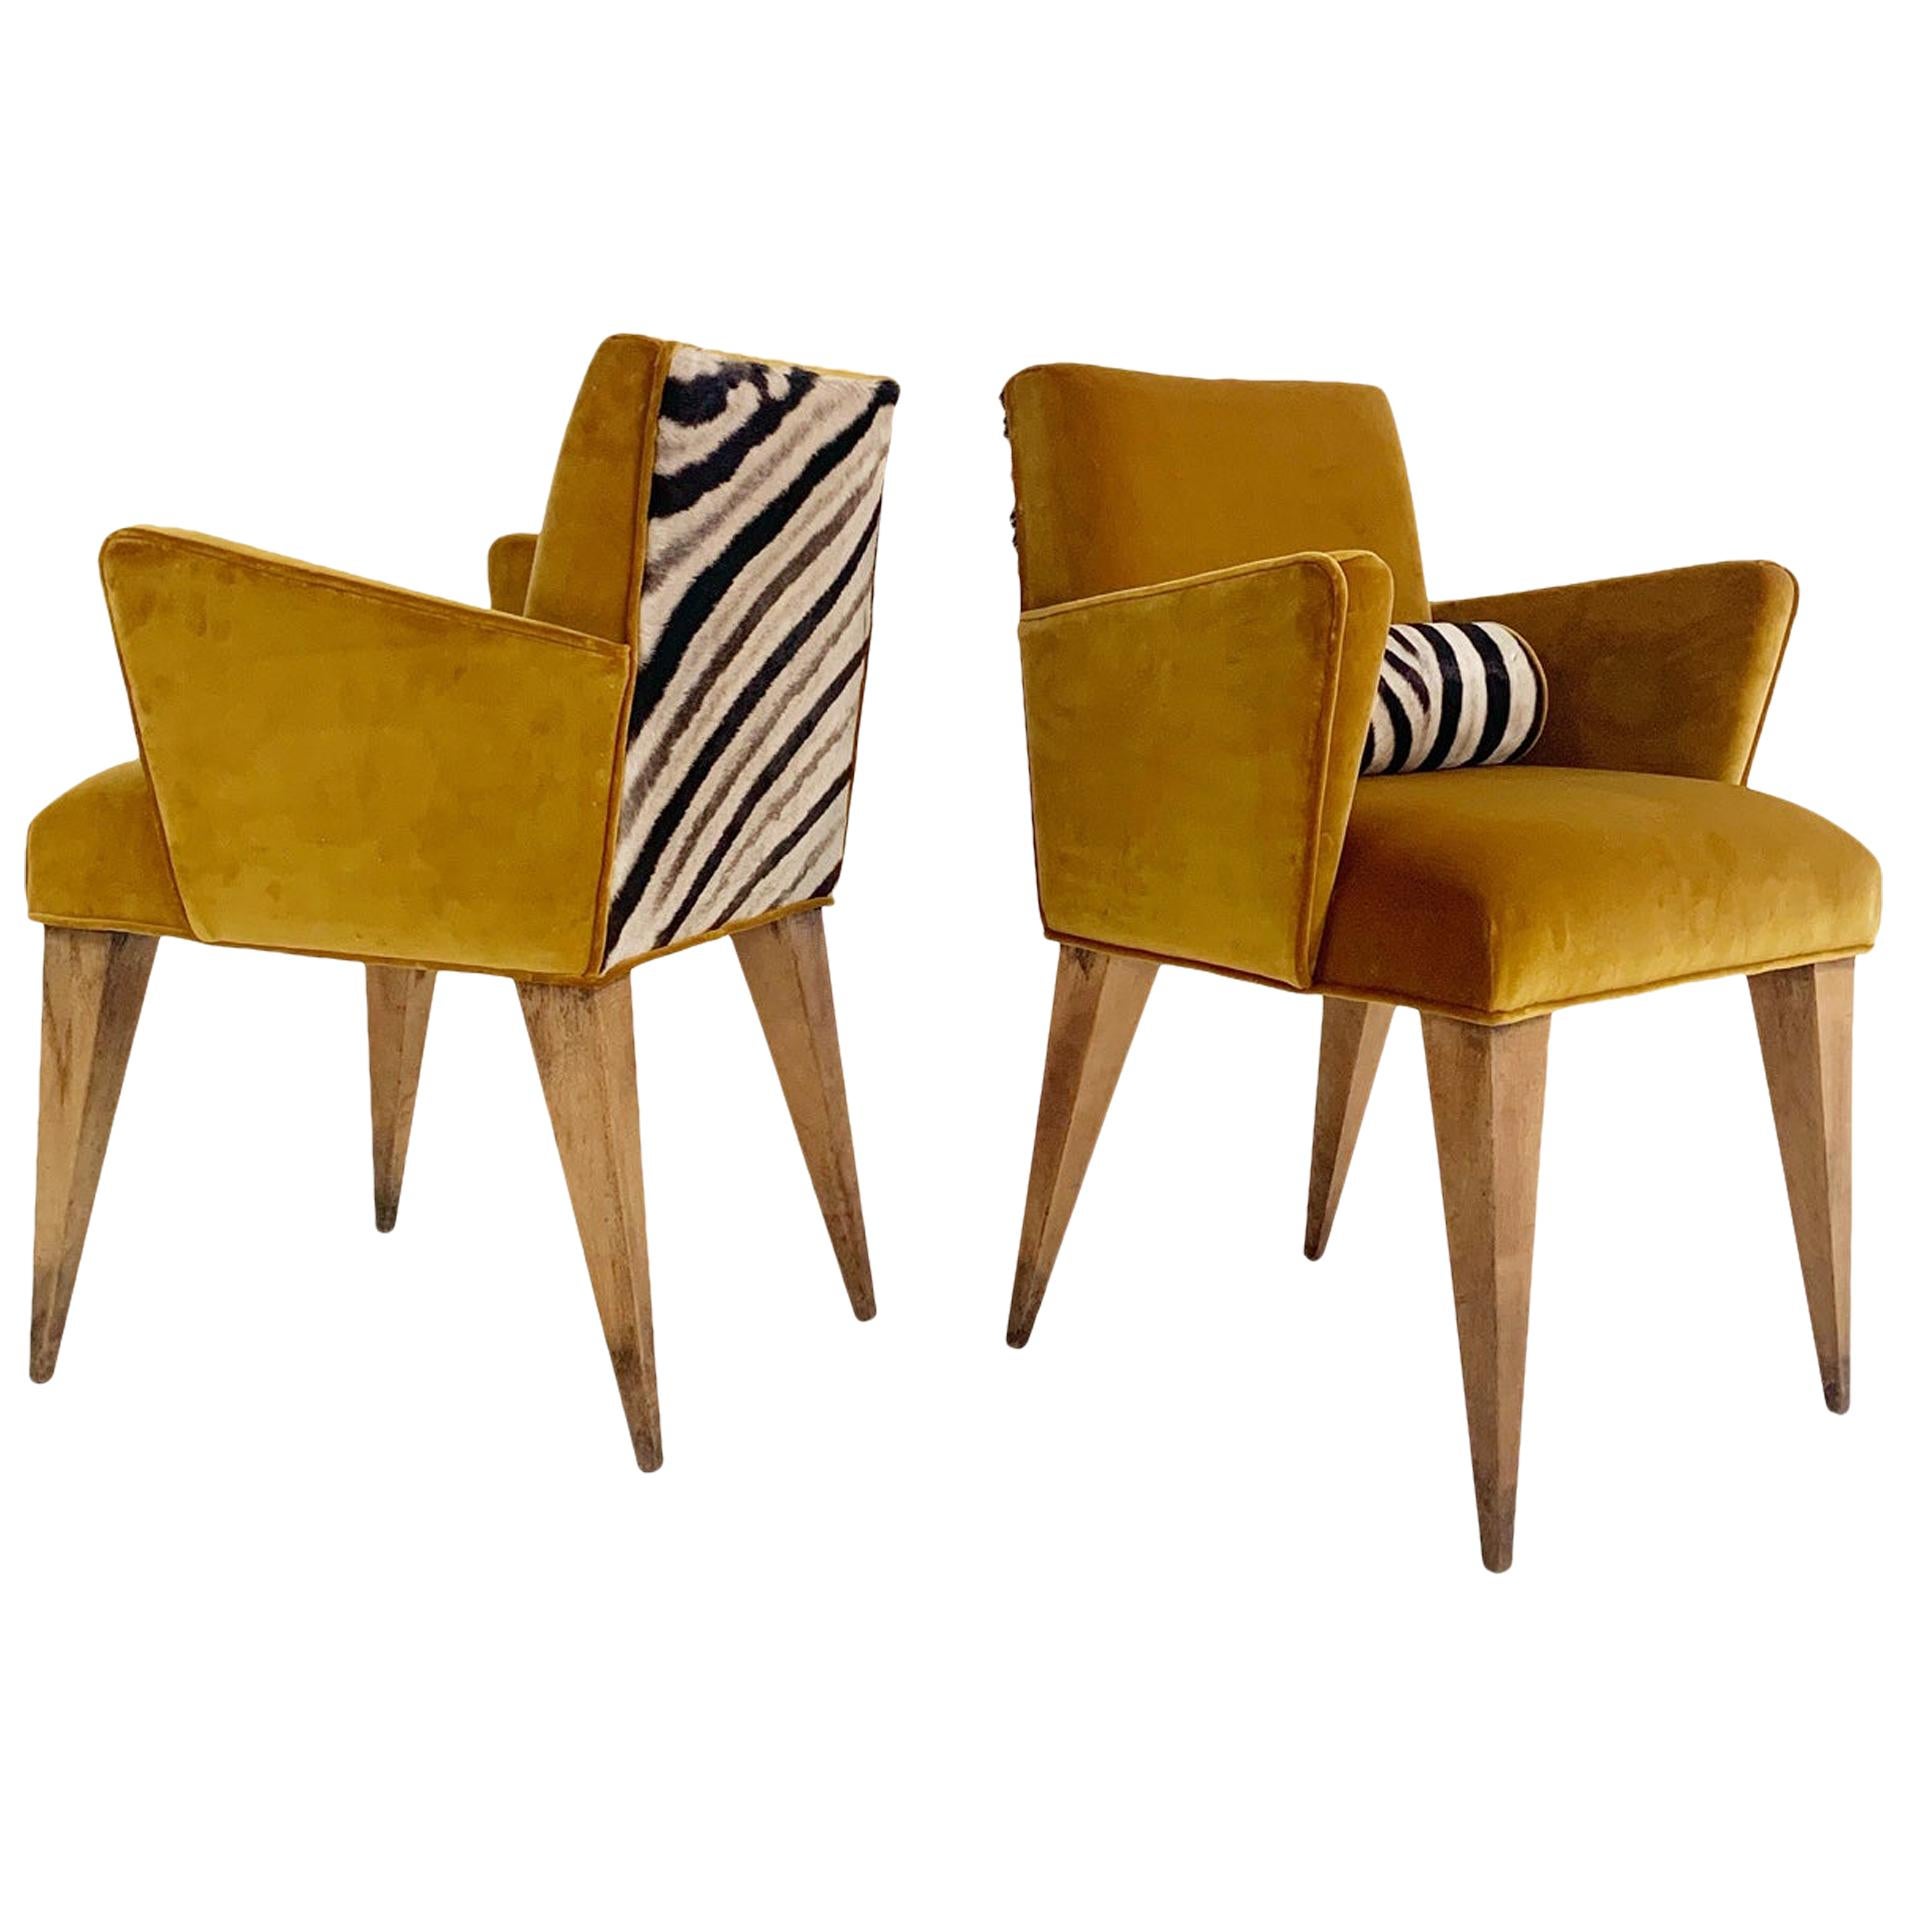 Mexican Modernist Chairs in Loro Piana Velvet and Zebra Hide, Pair